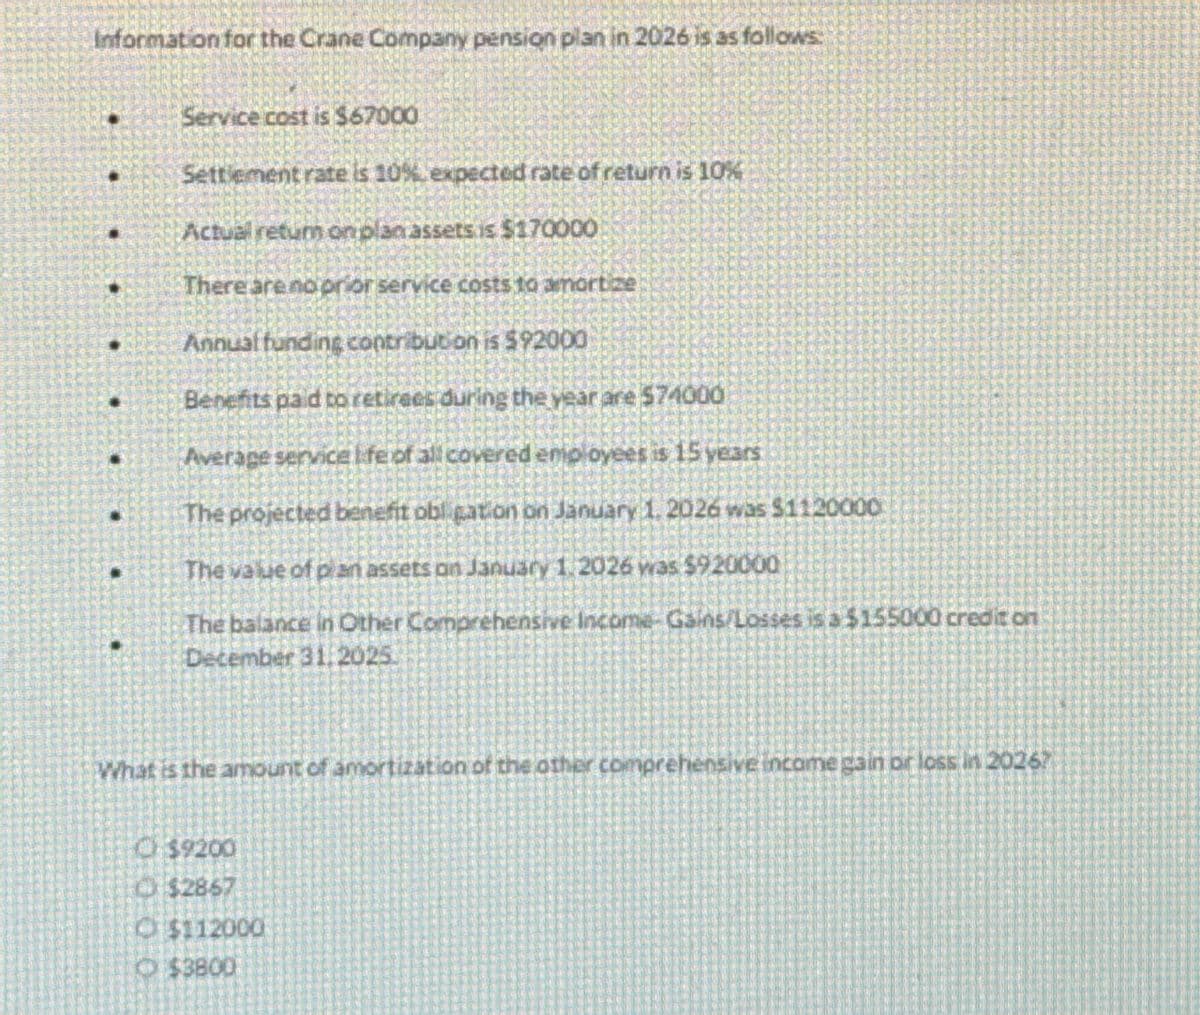 Information for the Crane Company pension plan in 2026 is as follows:
Service cost is $67000
Settlement rate is 10% expected rate of return is 10%
Actual return on plan assets is $170000
There are no prior service costs to amortize
Annual funding contribution is $92000
Benefits paid to retirees during the year are 574000
Average service life of all covered employees is 15 years
The projected benefit obligation on January 1, 2026 was $1120000
The value of plan assets on January 1 2026 was $920000
The balance in Other Comprehensive Income-Gains/Losses is a $155000 credit on
December 31,2025.
What is the amount of amortization of the other comprehensive income gain or loss in 20267
$9200
$2867
C$112000
$3800